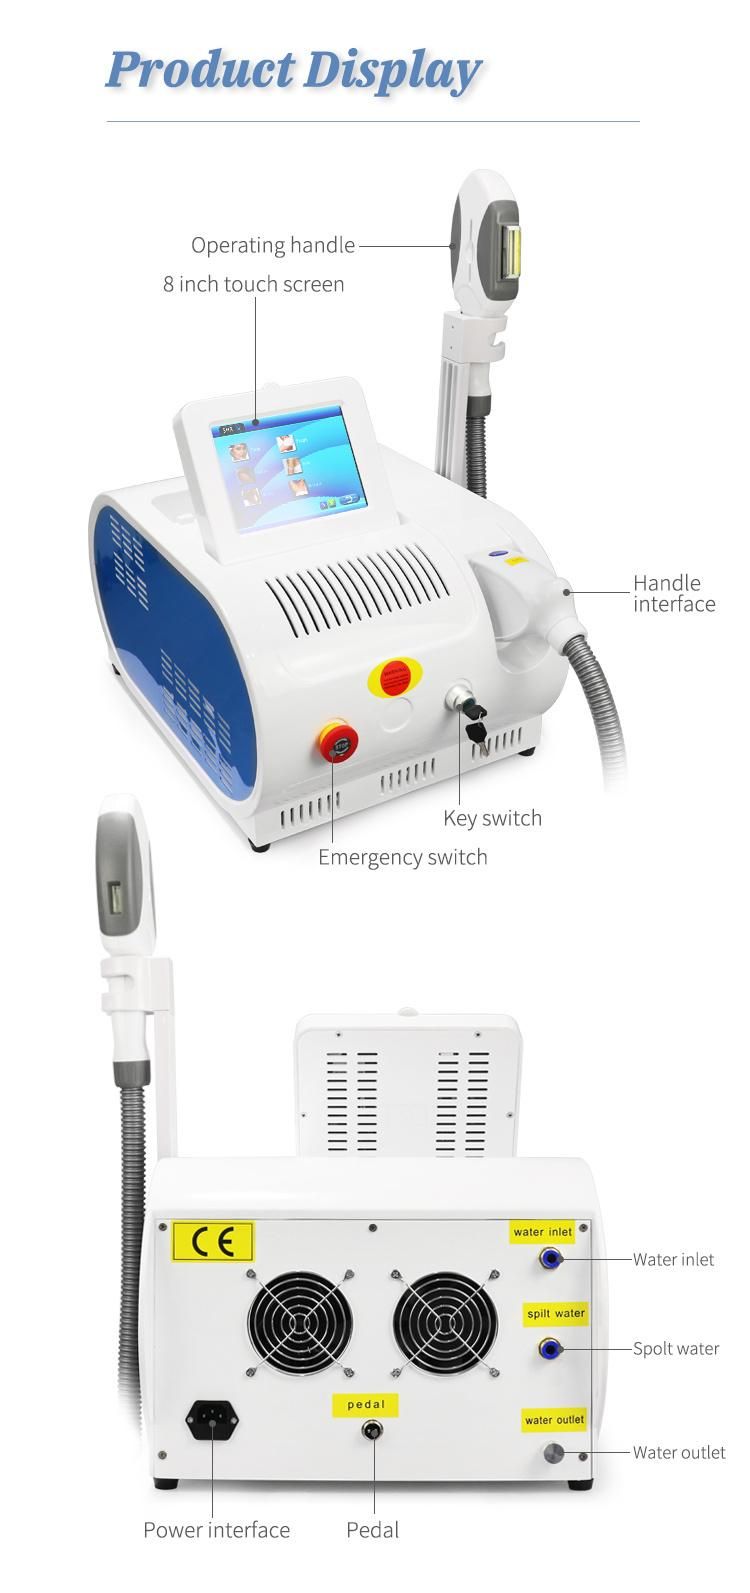 IPL and Opt System Laser Hair Removal Machine Beauty Salon Equipment